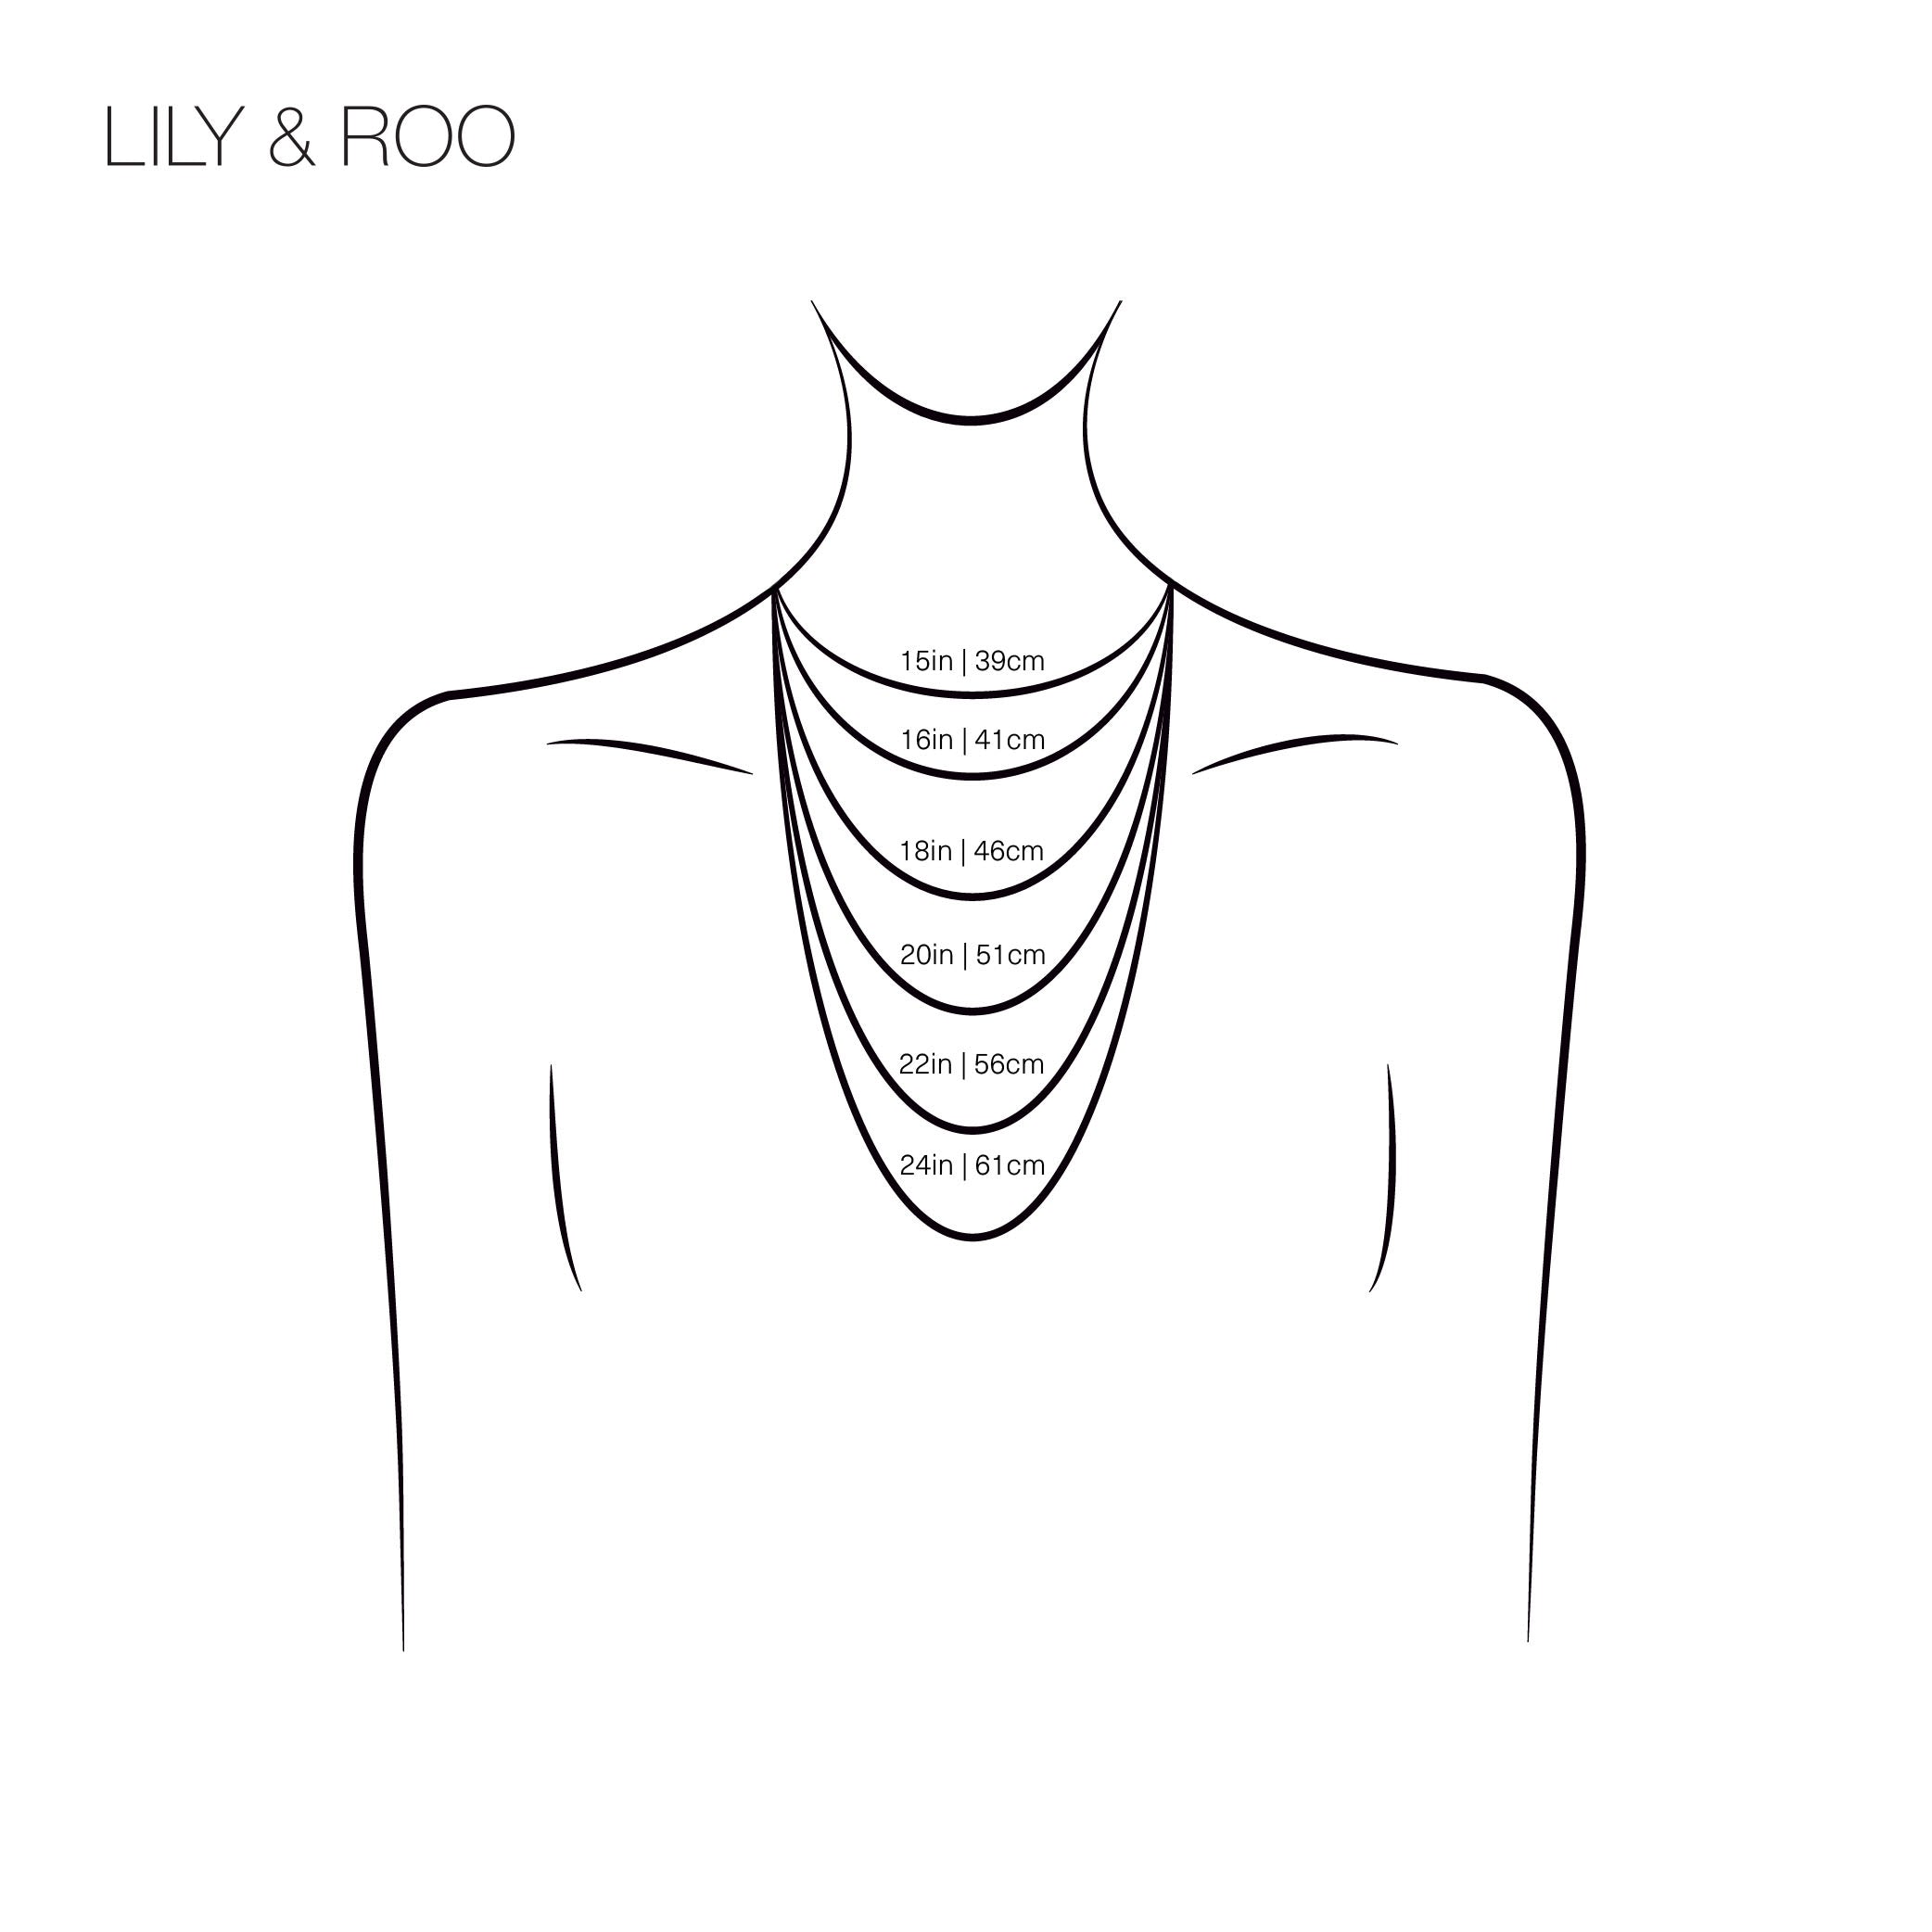 Silhouette drawing of a neck and chest with necklaces drawn on the neck and their sizes labelled in inches and cm